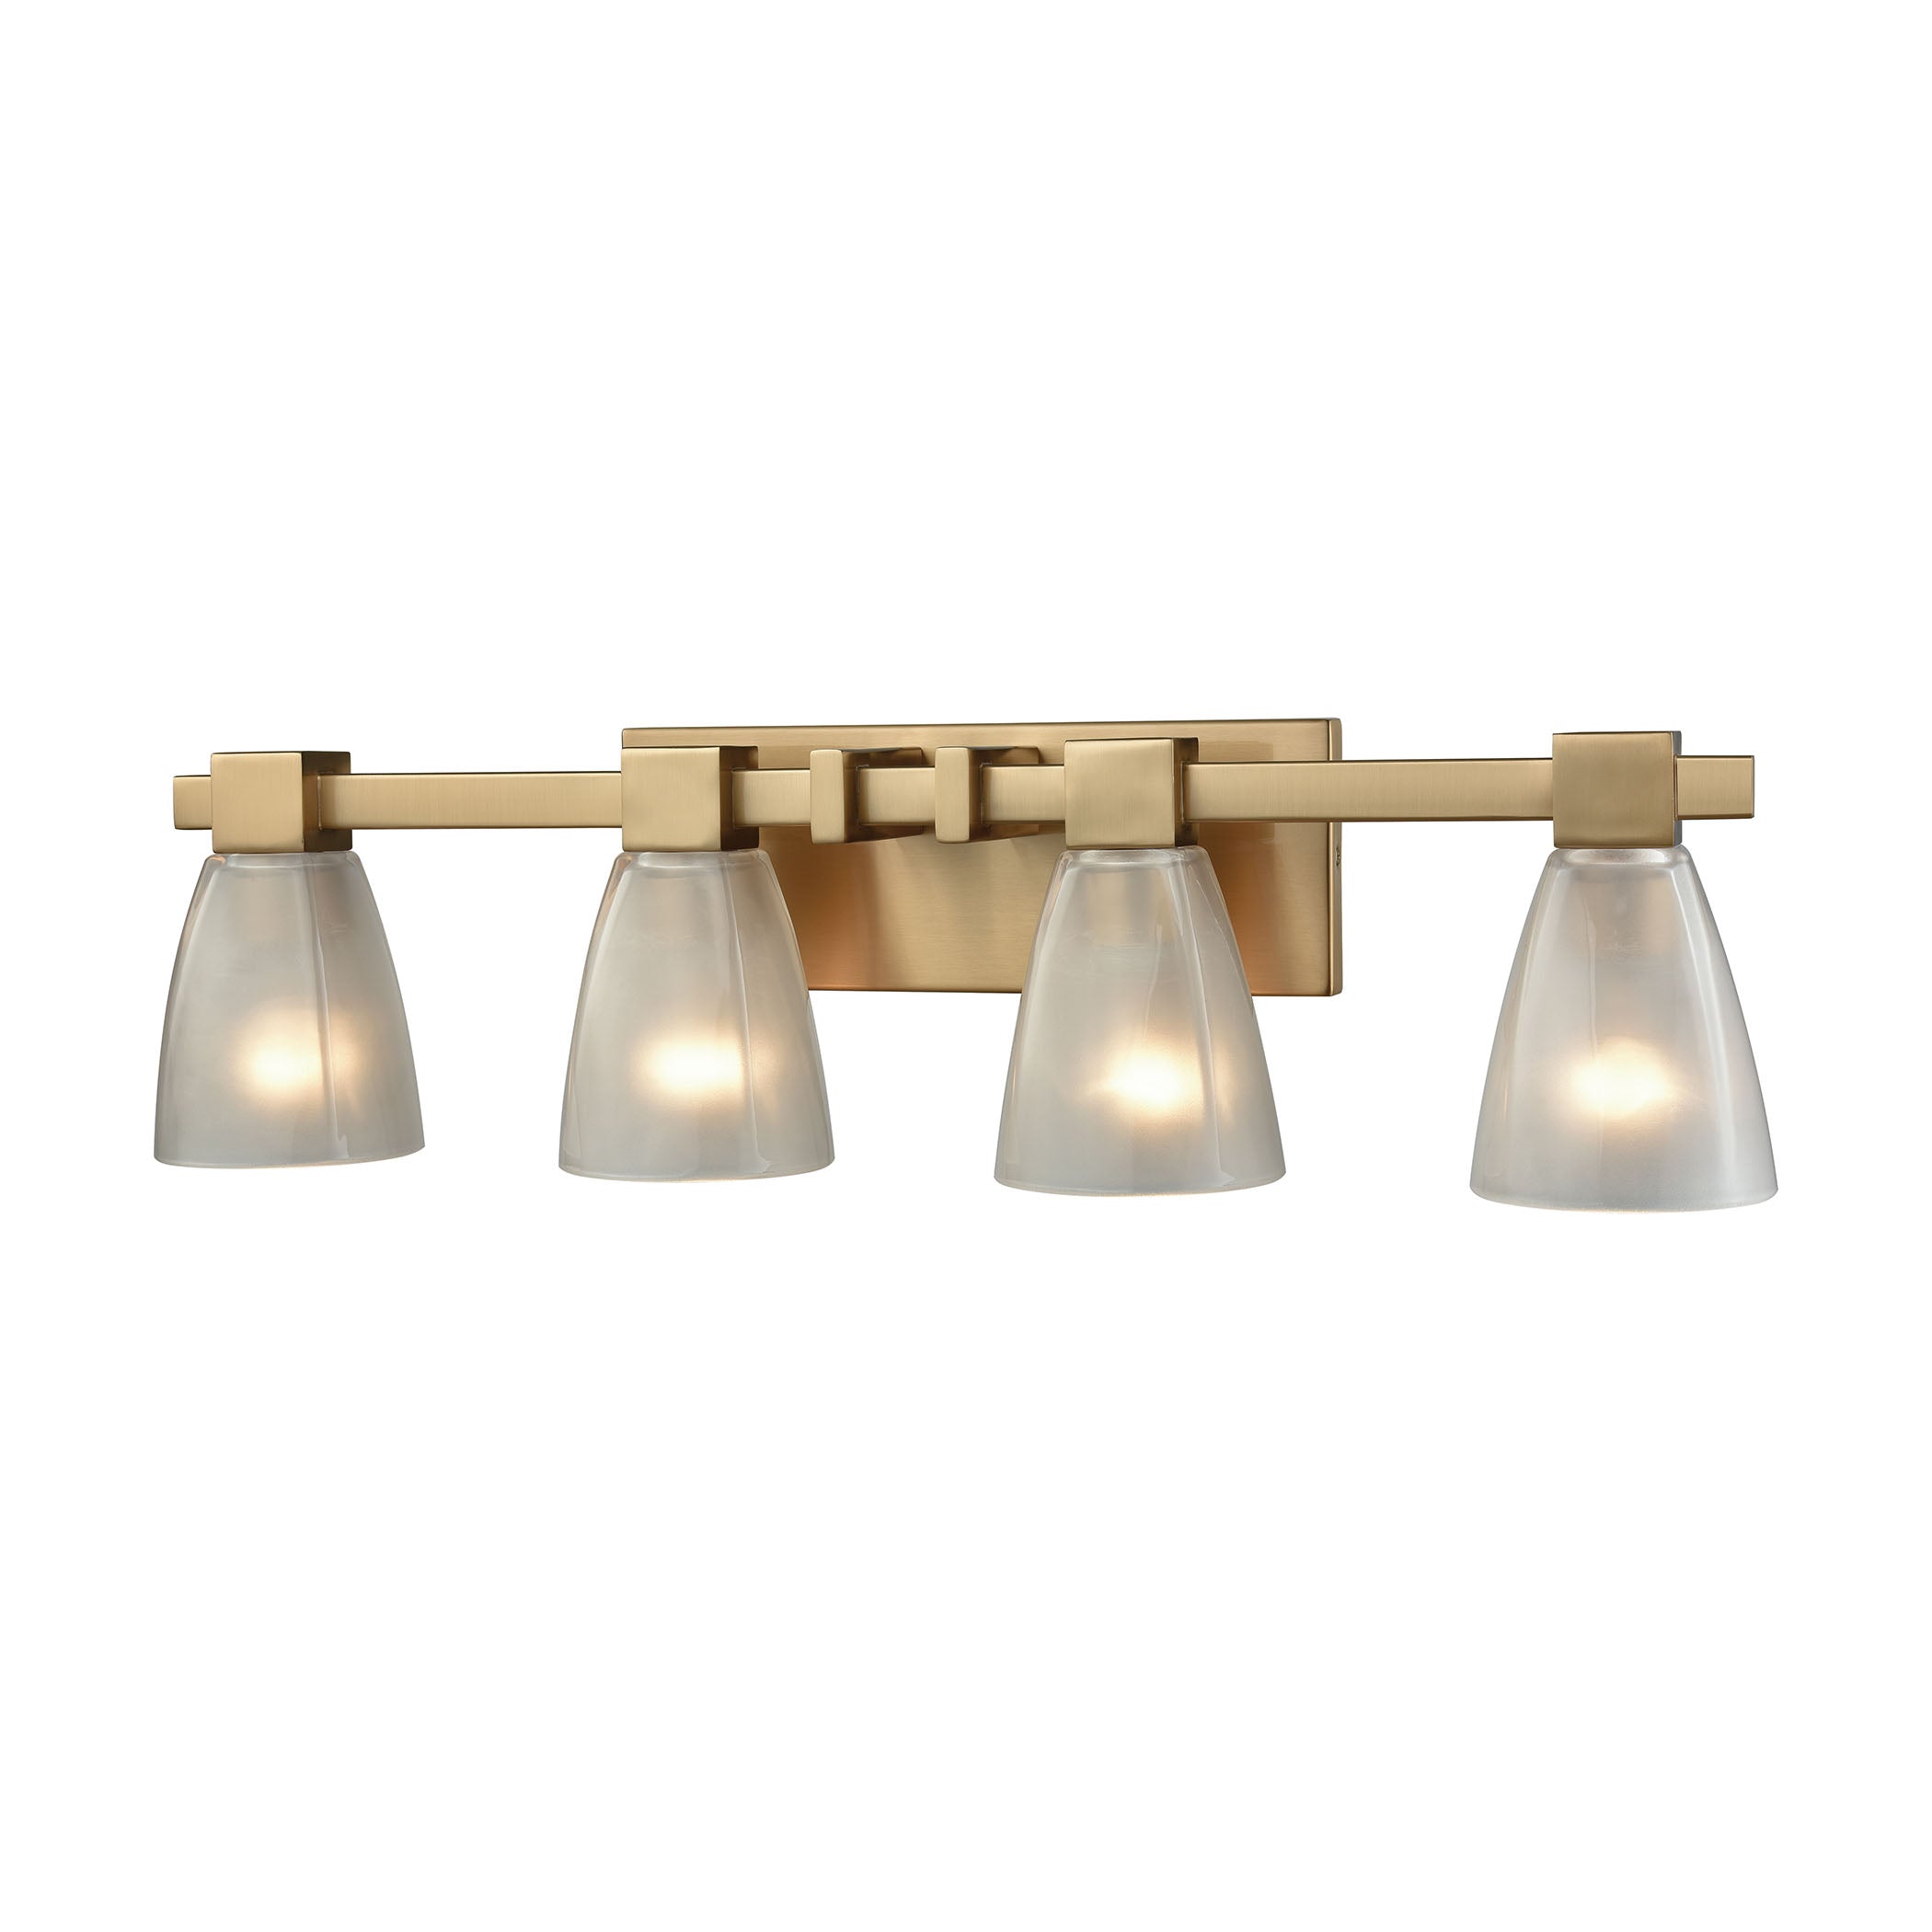 ELK Lighting 11993/4 Ensley 4-Light Vanity Lamp in Satin Brass with Square-to-Round Frosted Glass